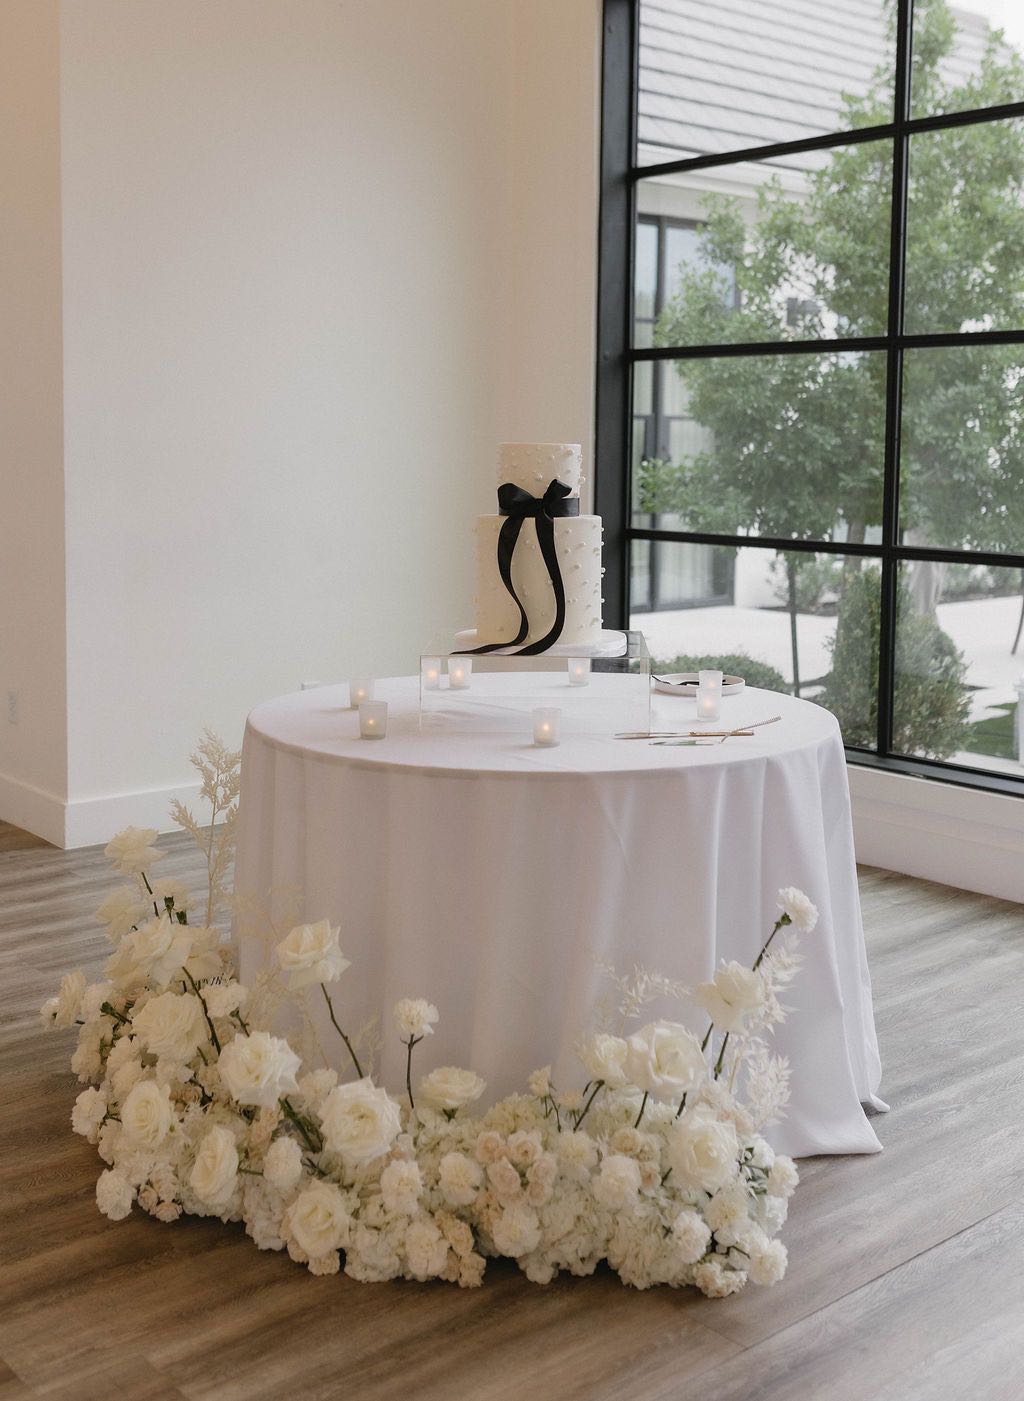 White wedding cake with black bow and grounded floral arrangements